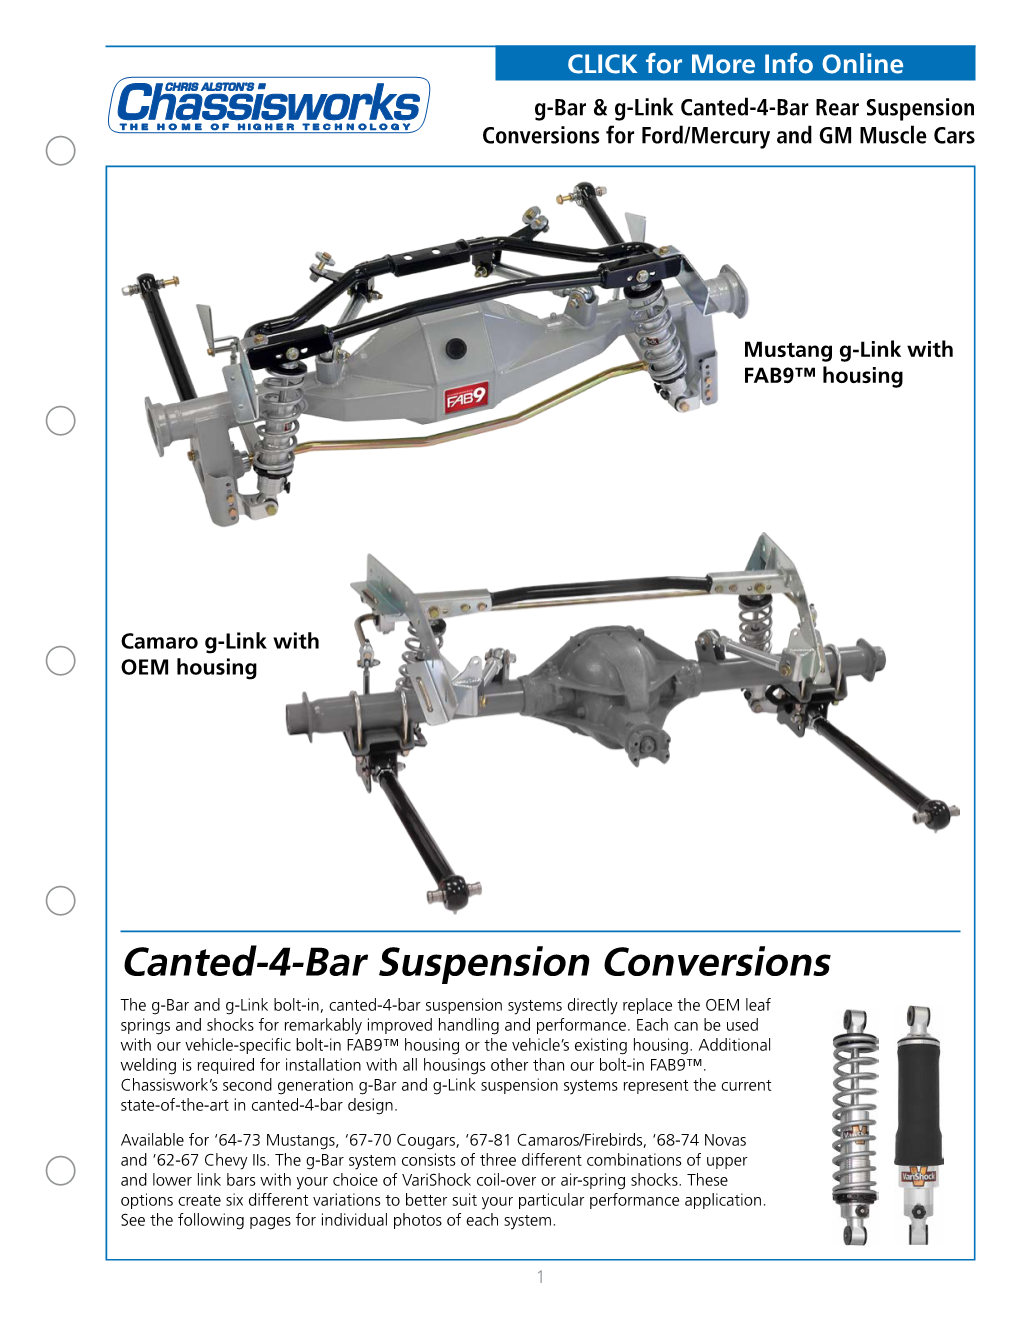 Canted-4-Bar Suspension Conversions